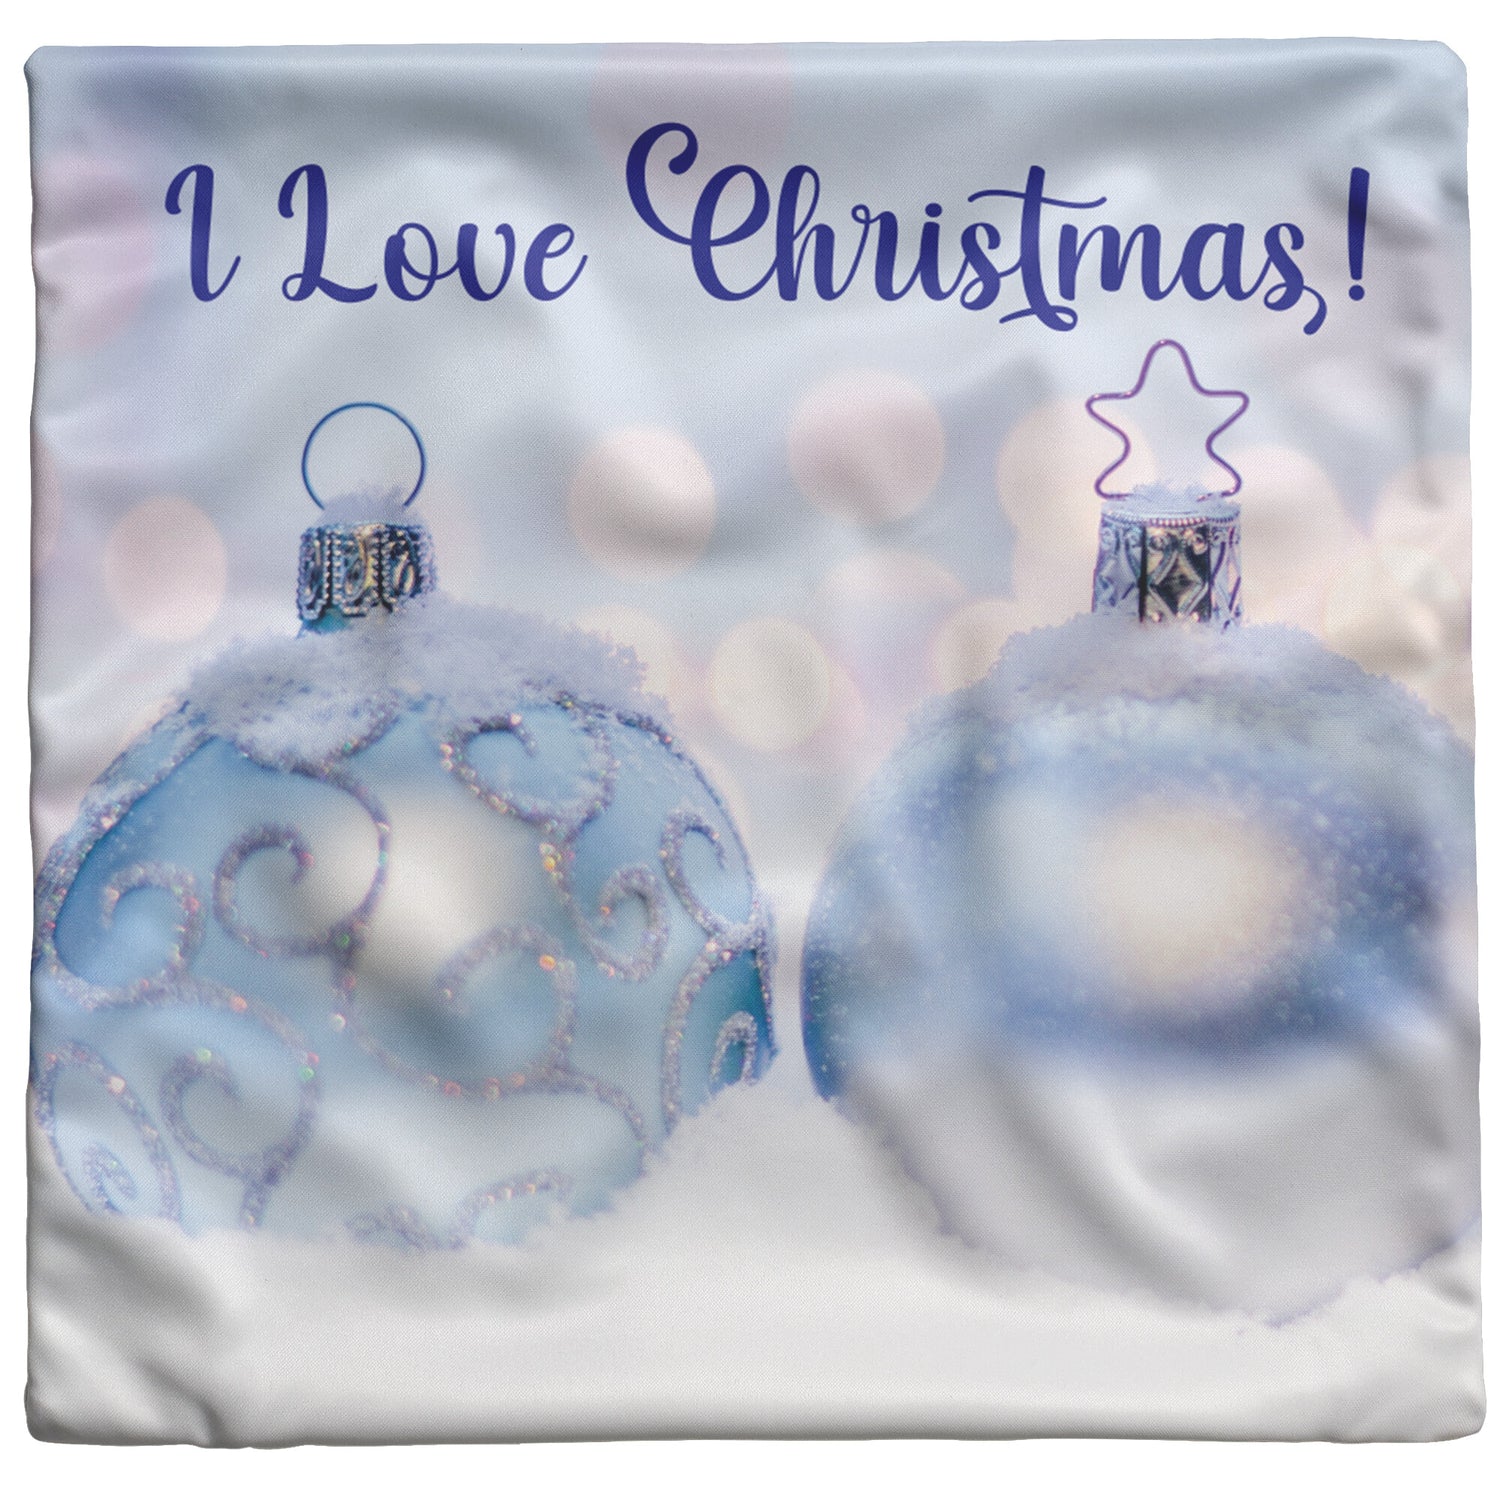 I Love Christmas! Pillow With Pink Accent - Signs and Seasons Gifts